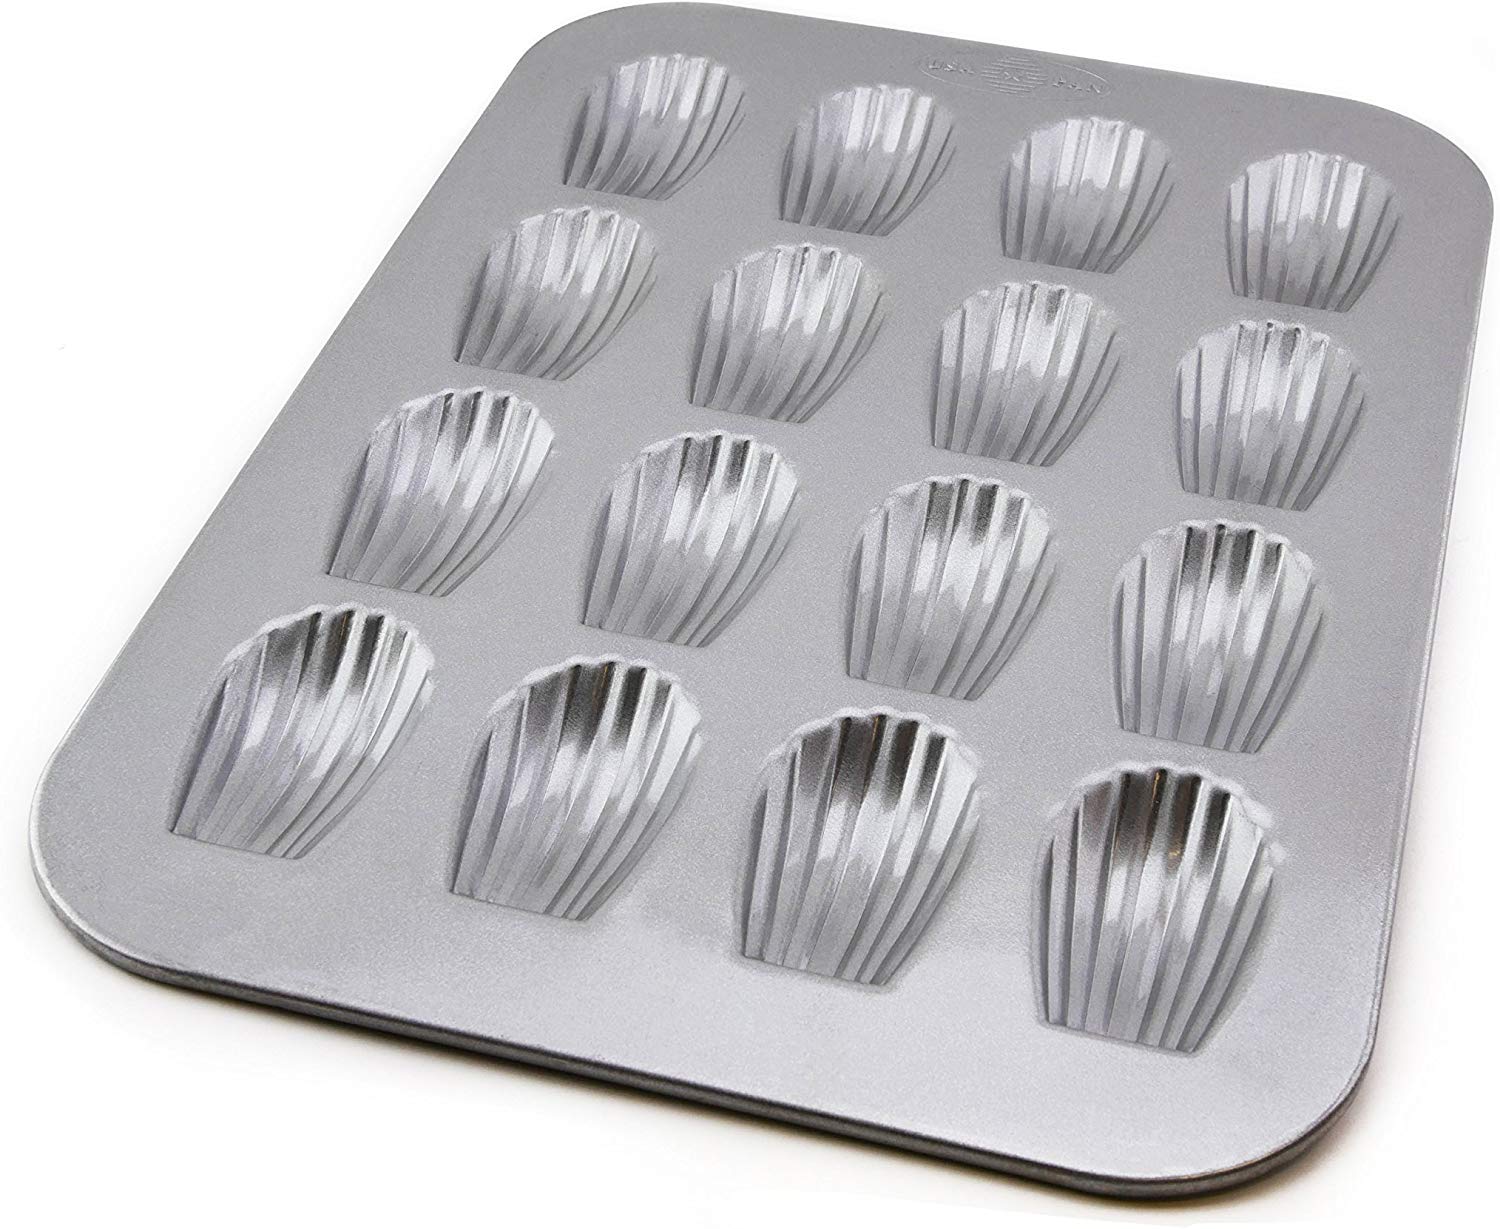 USA Pan 1297MD Bakeware Madeleine, Warp Resistant Nonstick Baking Pan, Made in The USA from Aluminized Steel, 16-Well, Silver